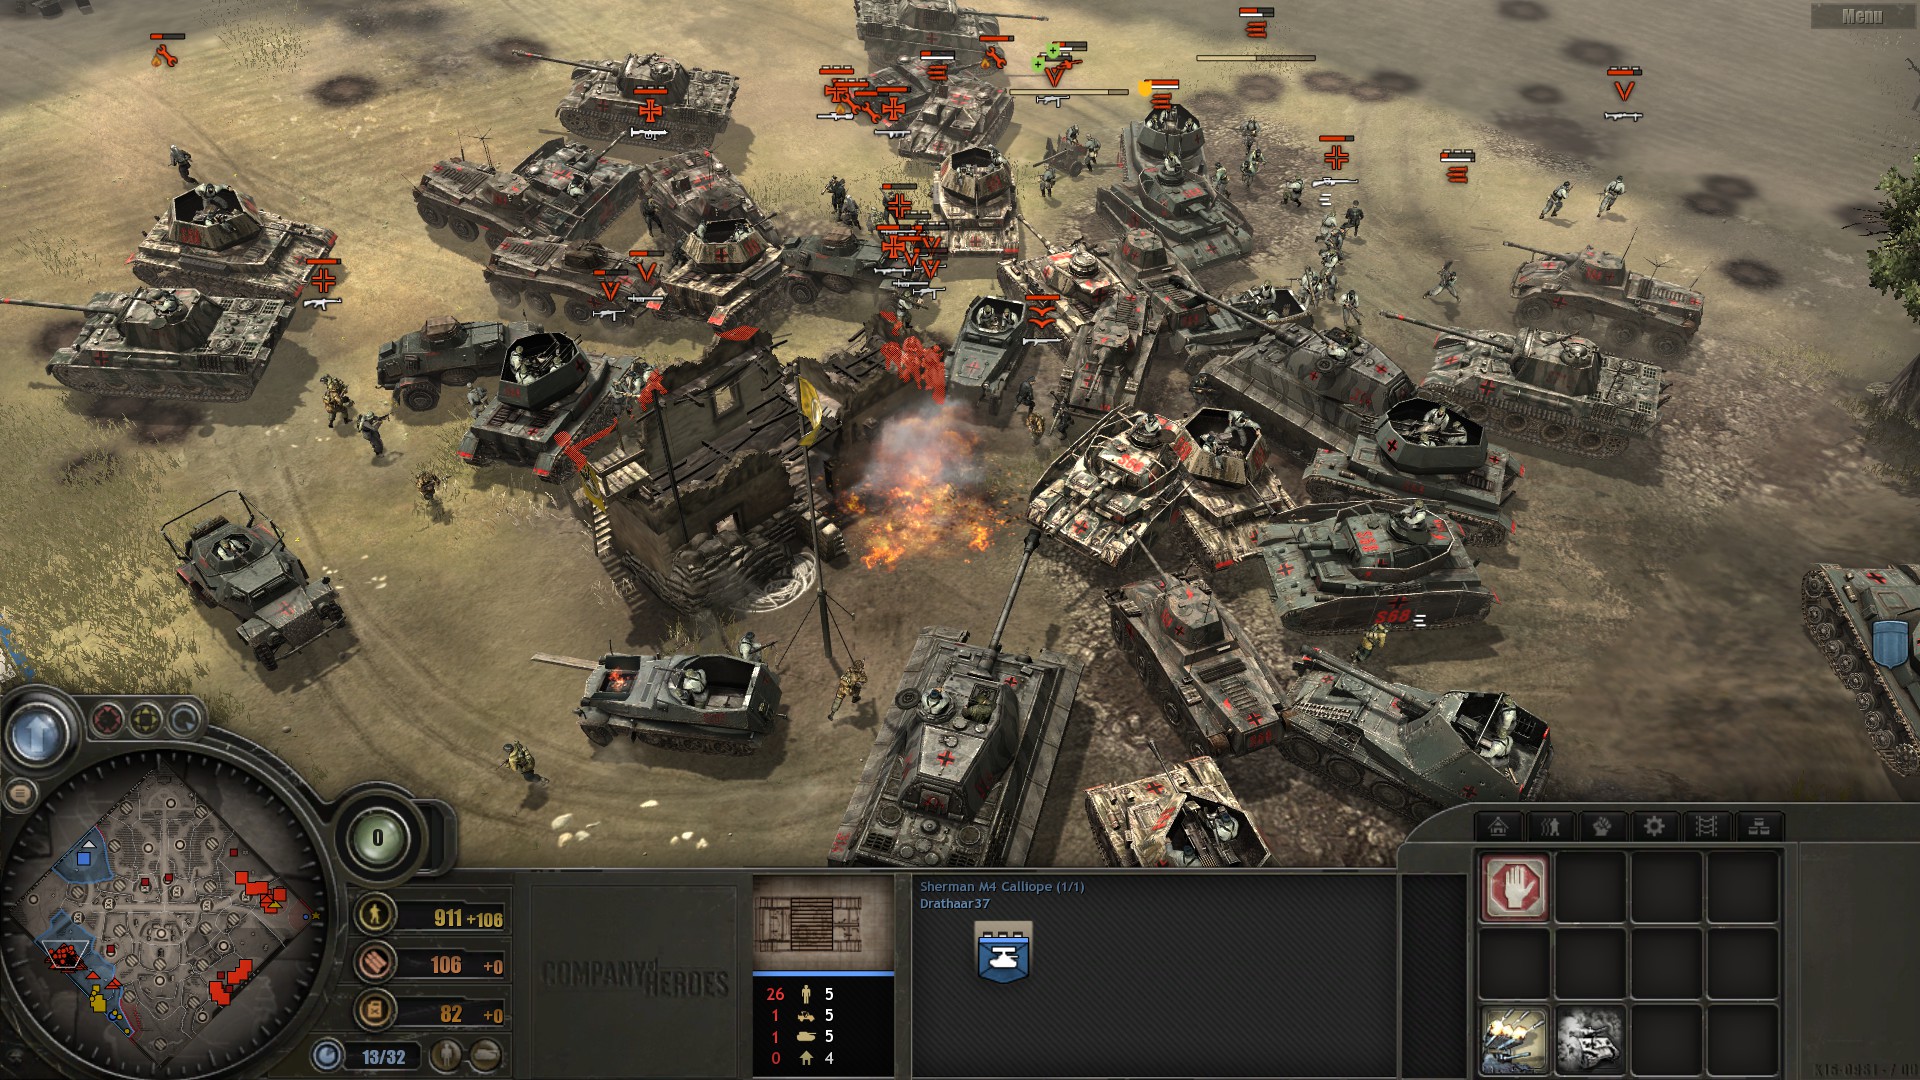 company of heroes steam version mods ai use infantry